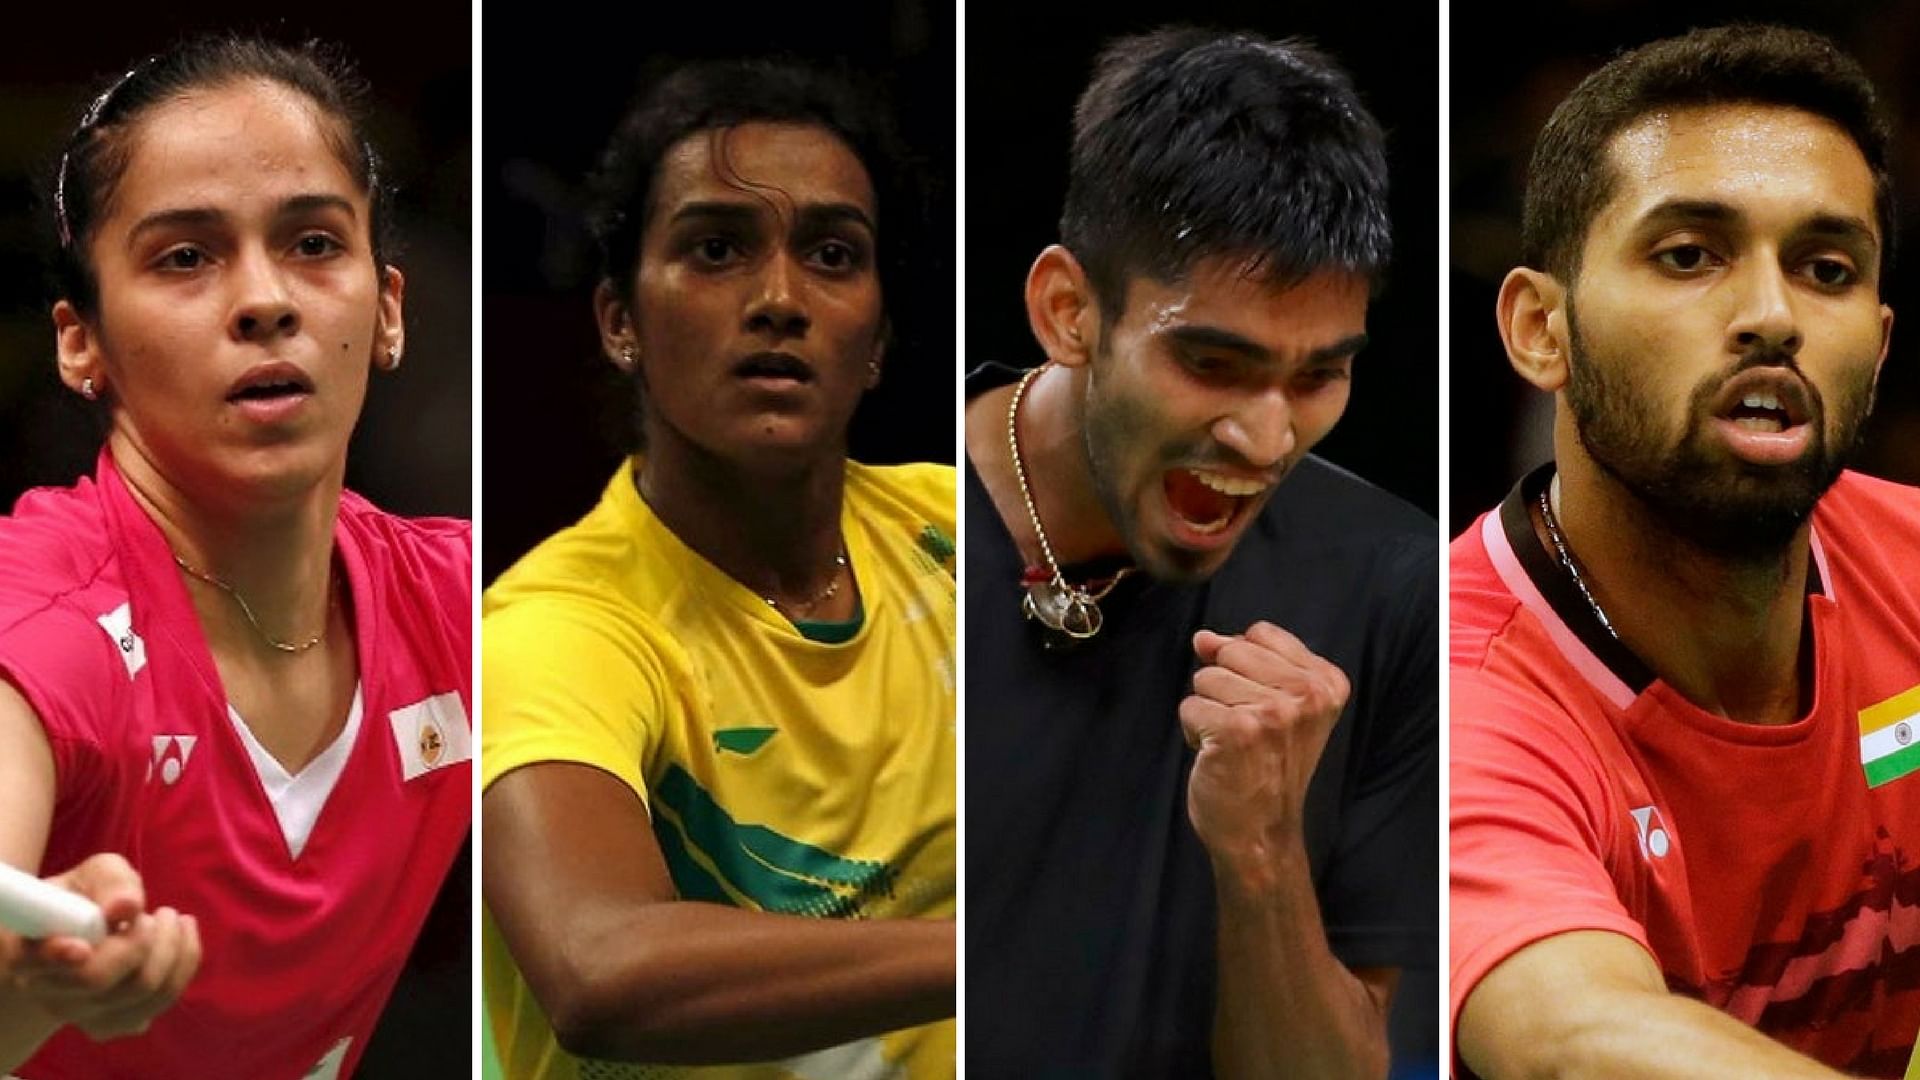 In a major revamp, the Badminton Association of India announced the introduction of a multi-level domestic tournament structure.